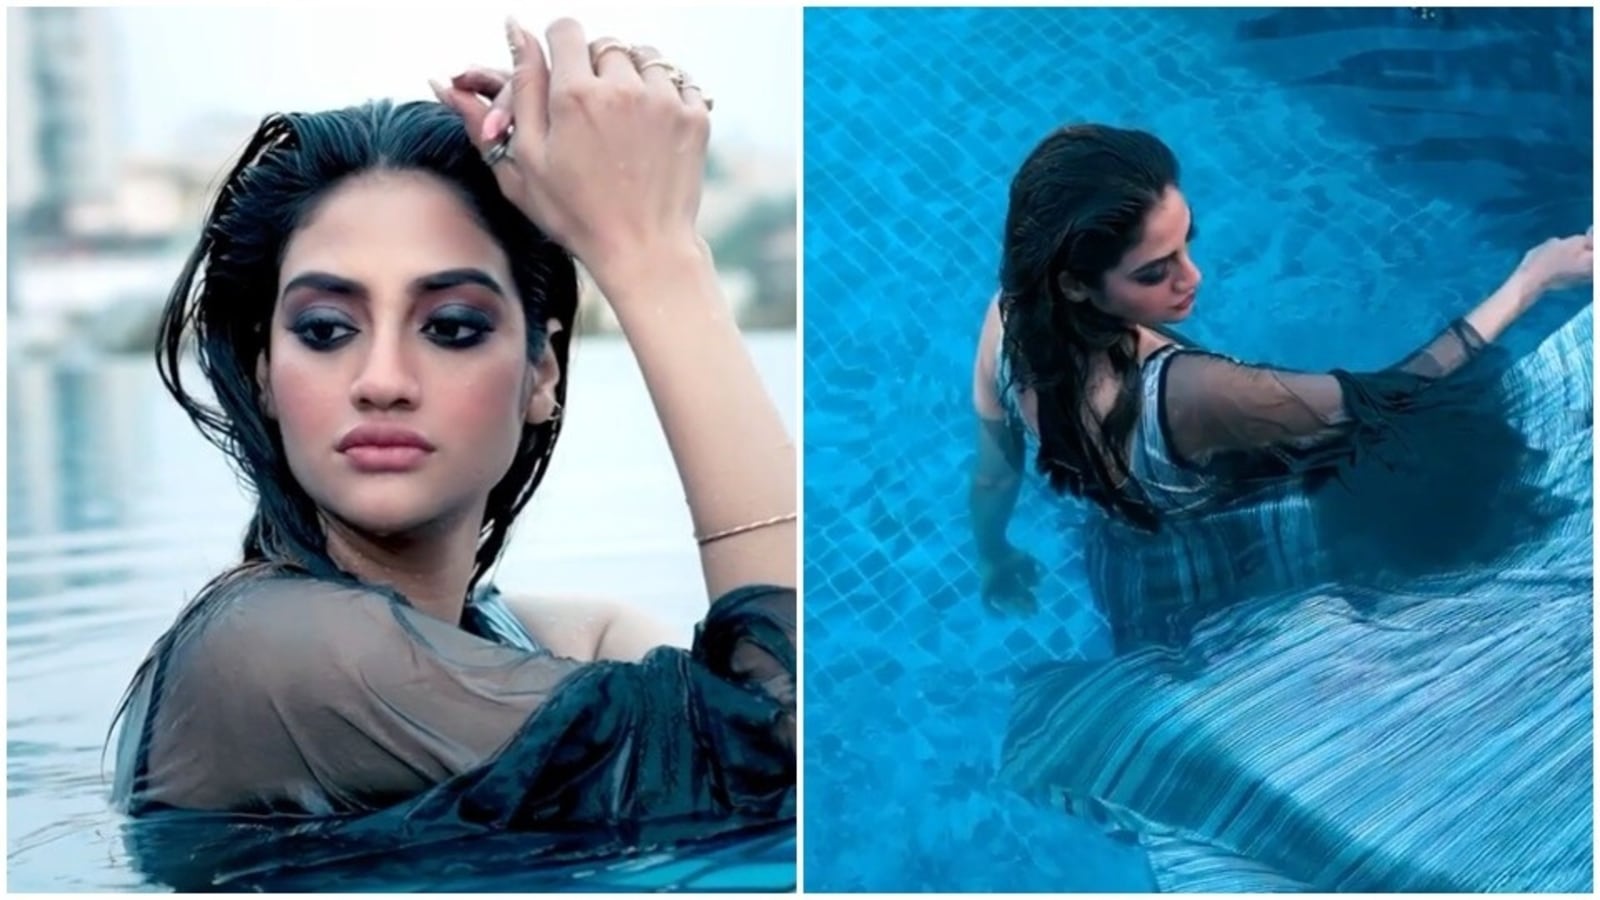 Nusrat Jahan Xxx - Pregnant Nusrat Jahan takes a dip in pool for photoshoot, promotes  contraceptive pills on Instagram - Hindustan Times